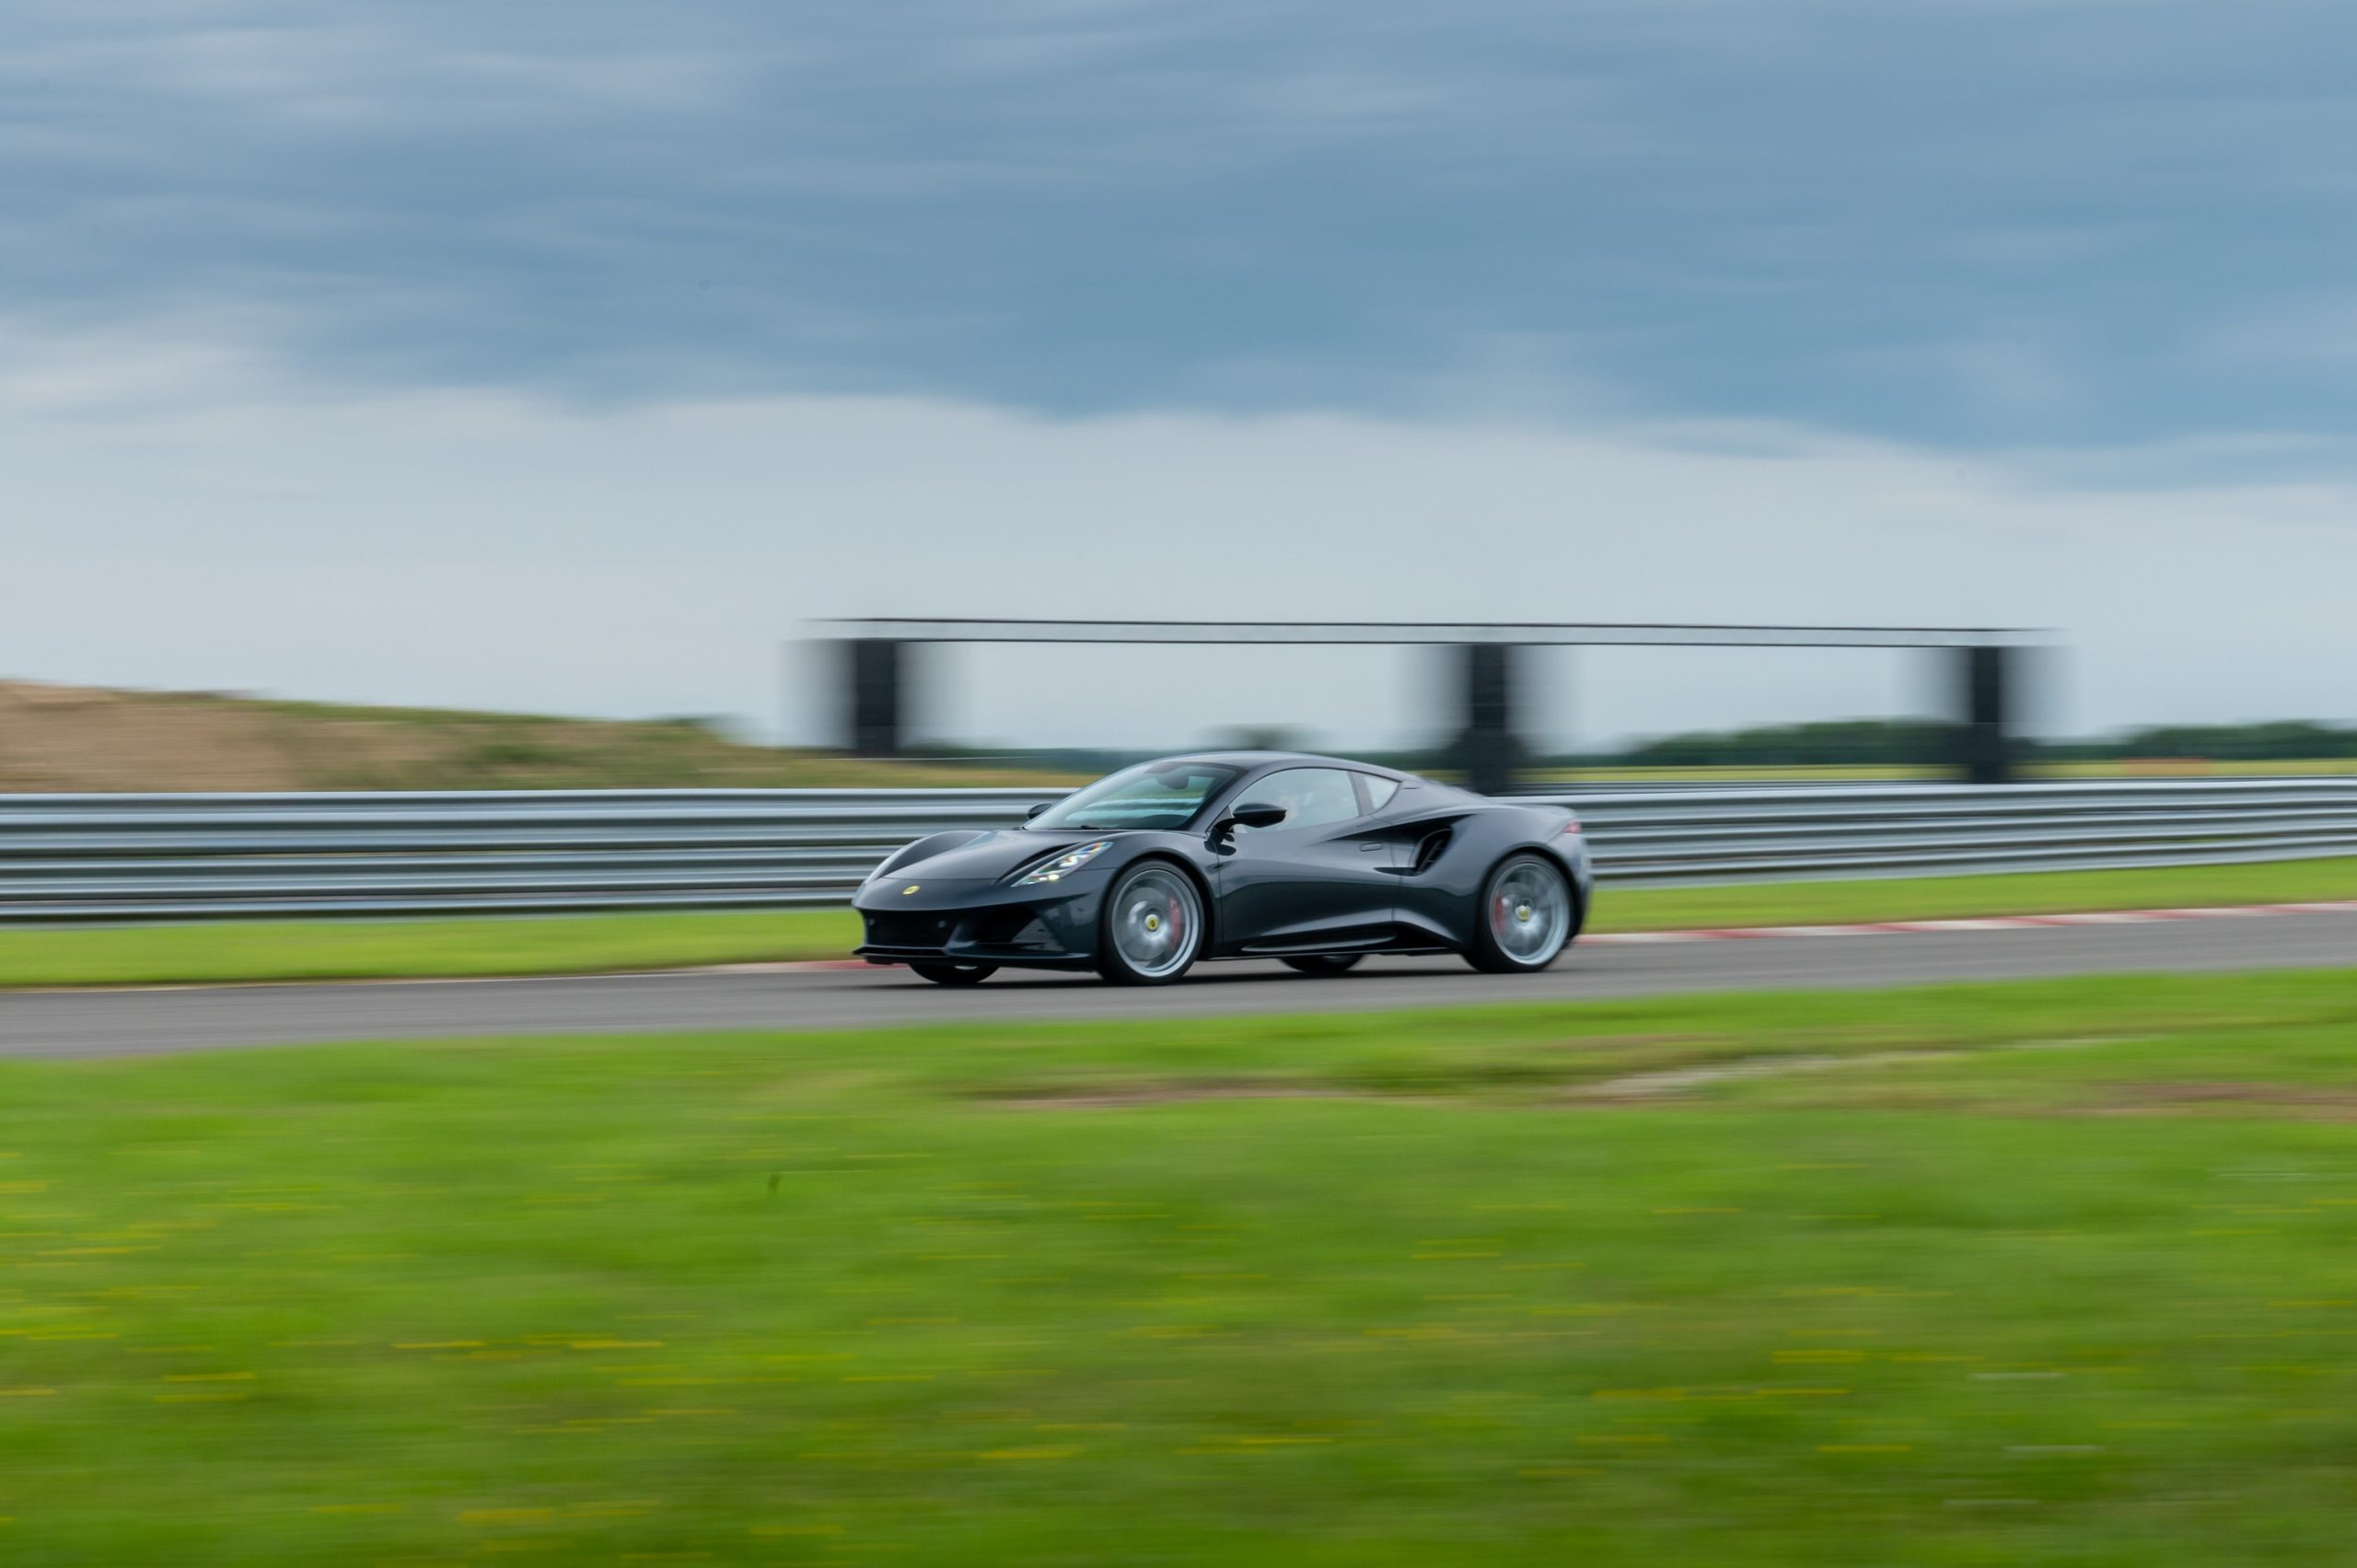 A black Lotus Emira on a racetrack, shot from afar in profile